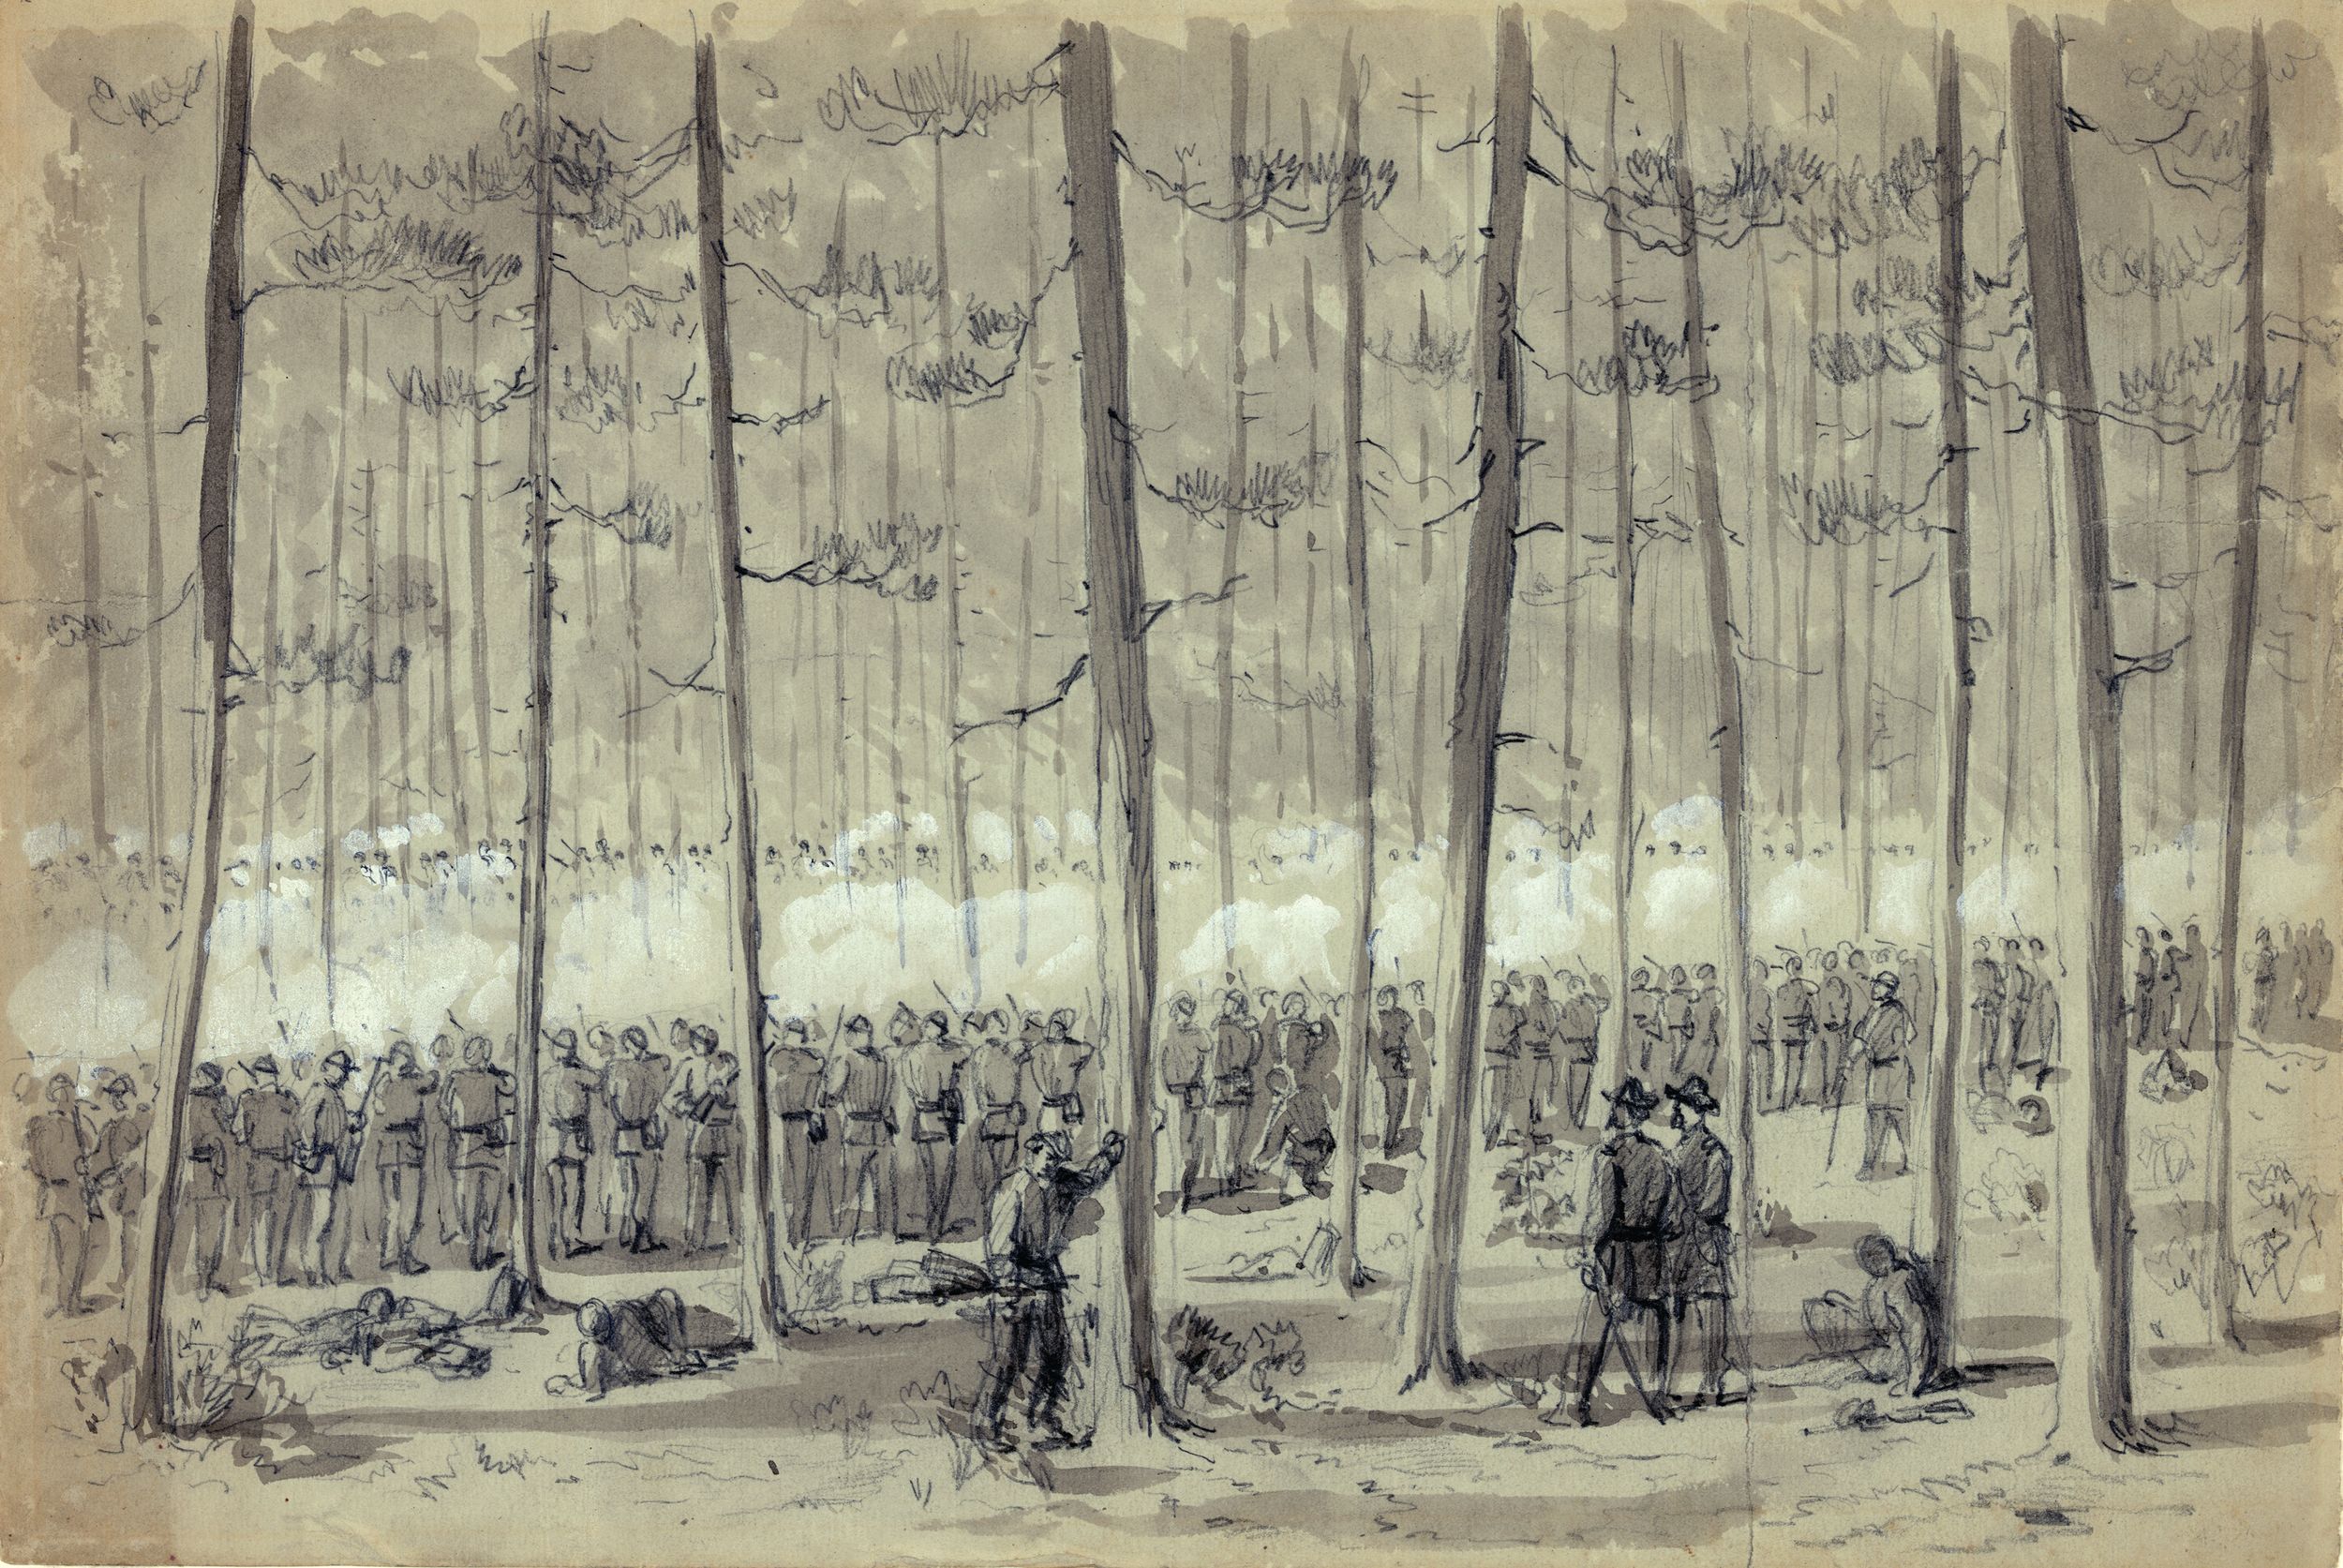 On the back of his sketch of the Battle of Darby Town Road, artist William Waud wrote “Friday 9th attempt of the Rebels to turn our right flank. The fighting was done in thick woods. Our men shewn[sic]in this sketch are armed with the Spencer Rifle.” 